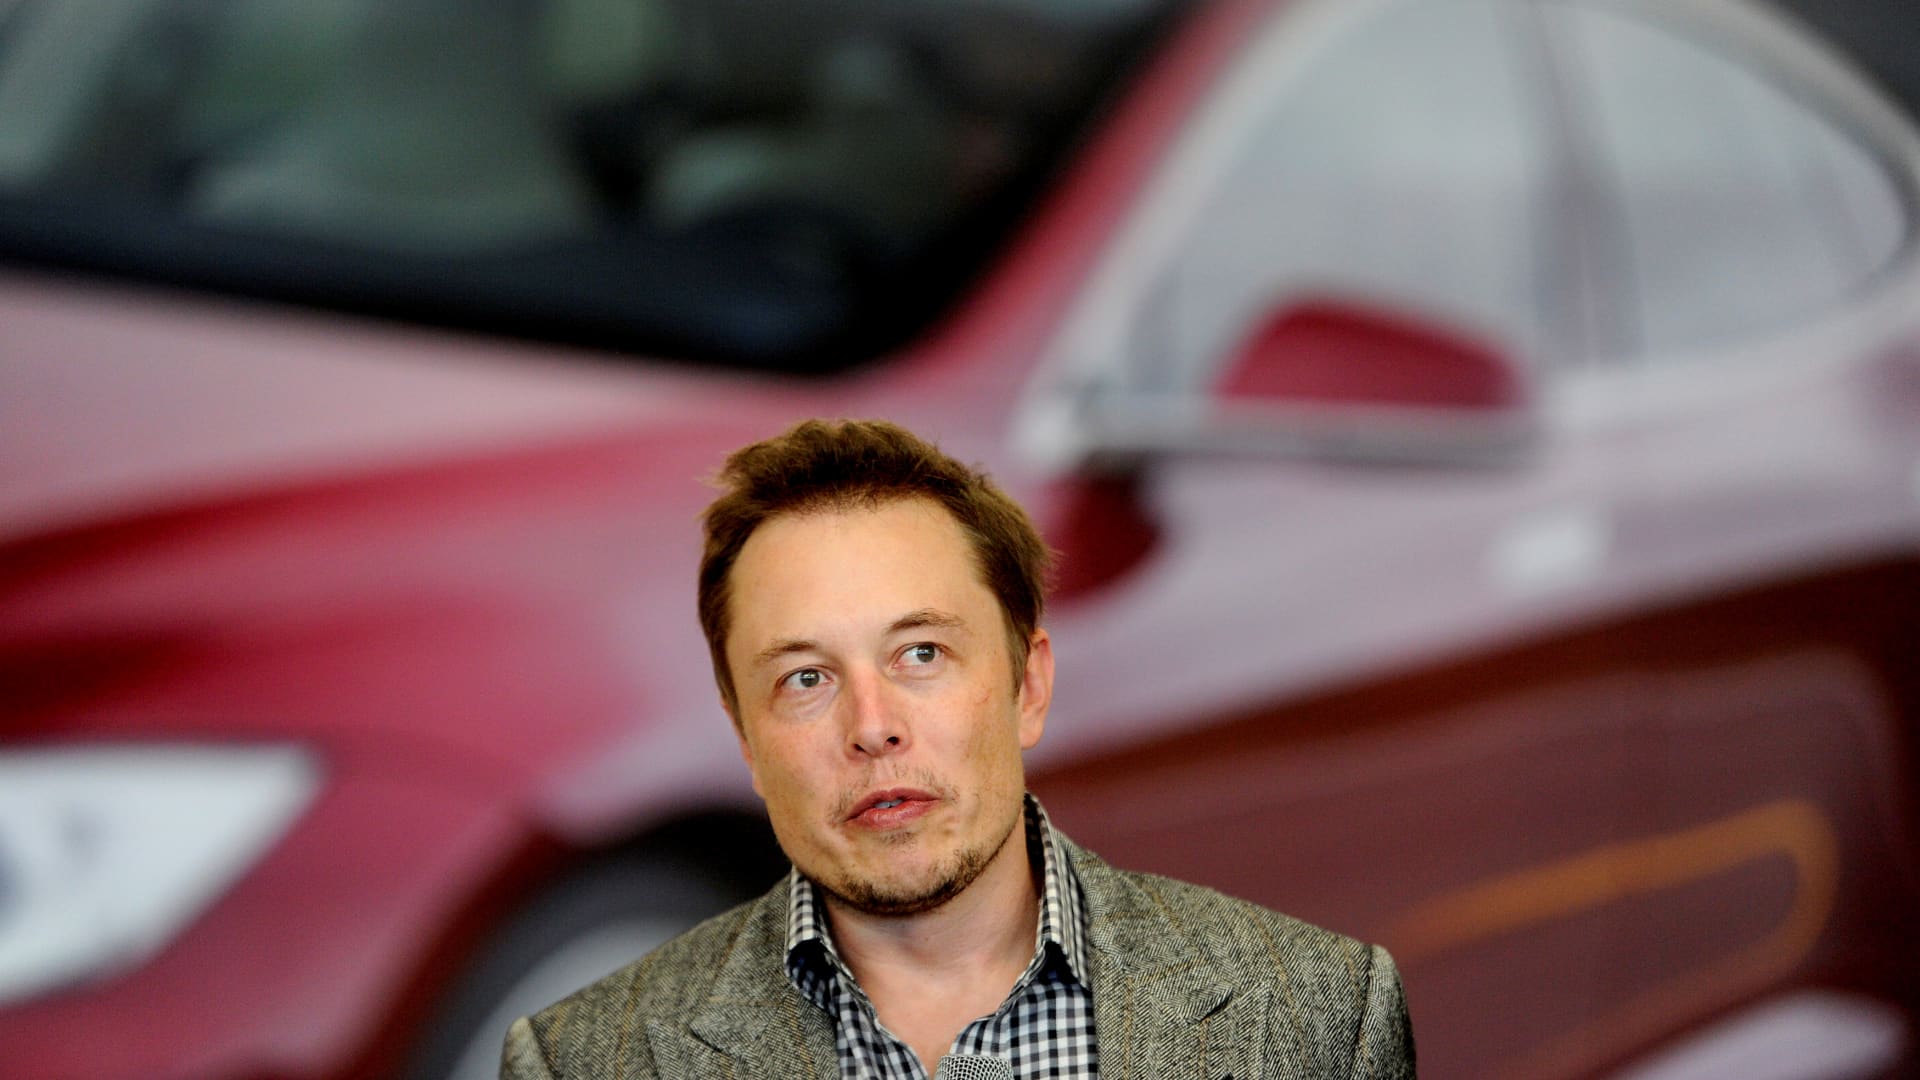 Elon Musk calls US media and schools ‘racist against whites & Asians’